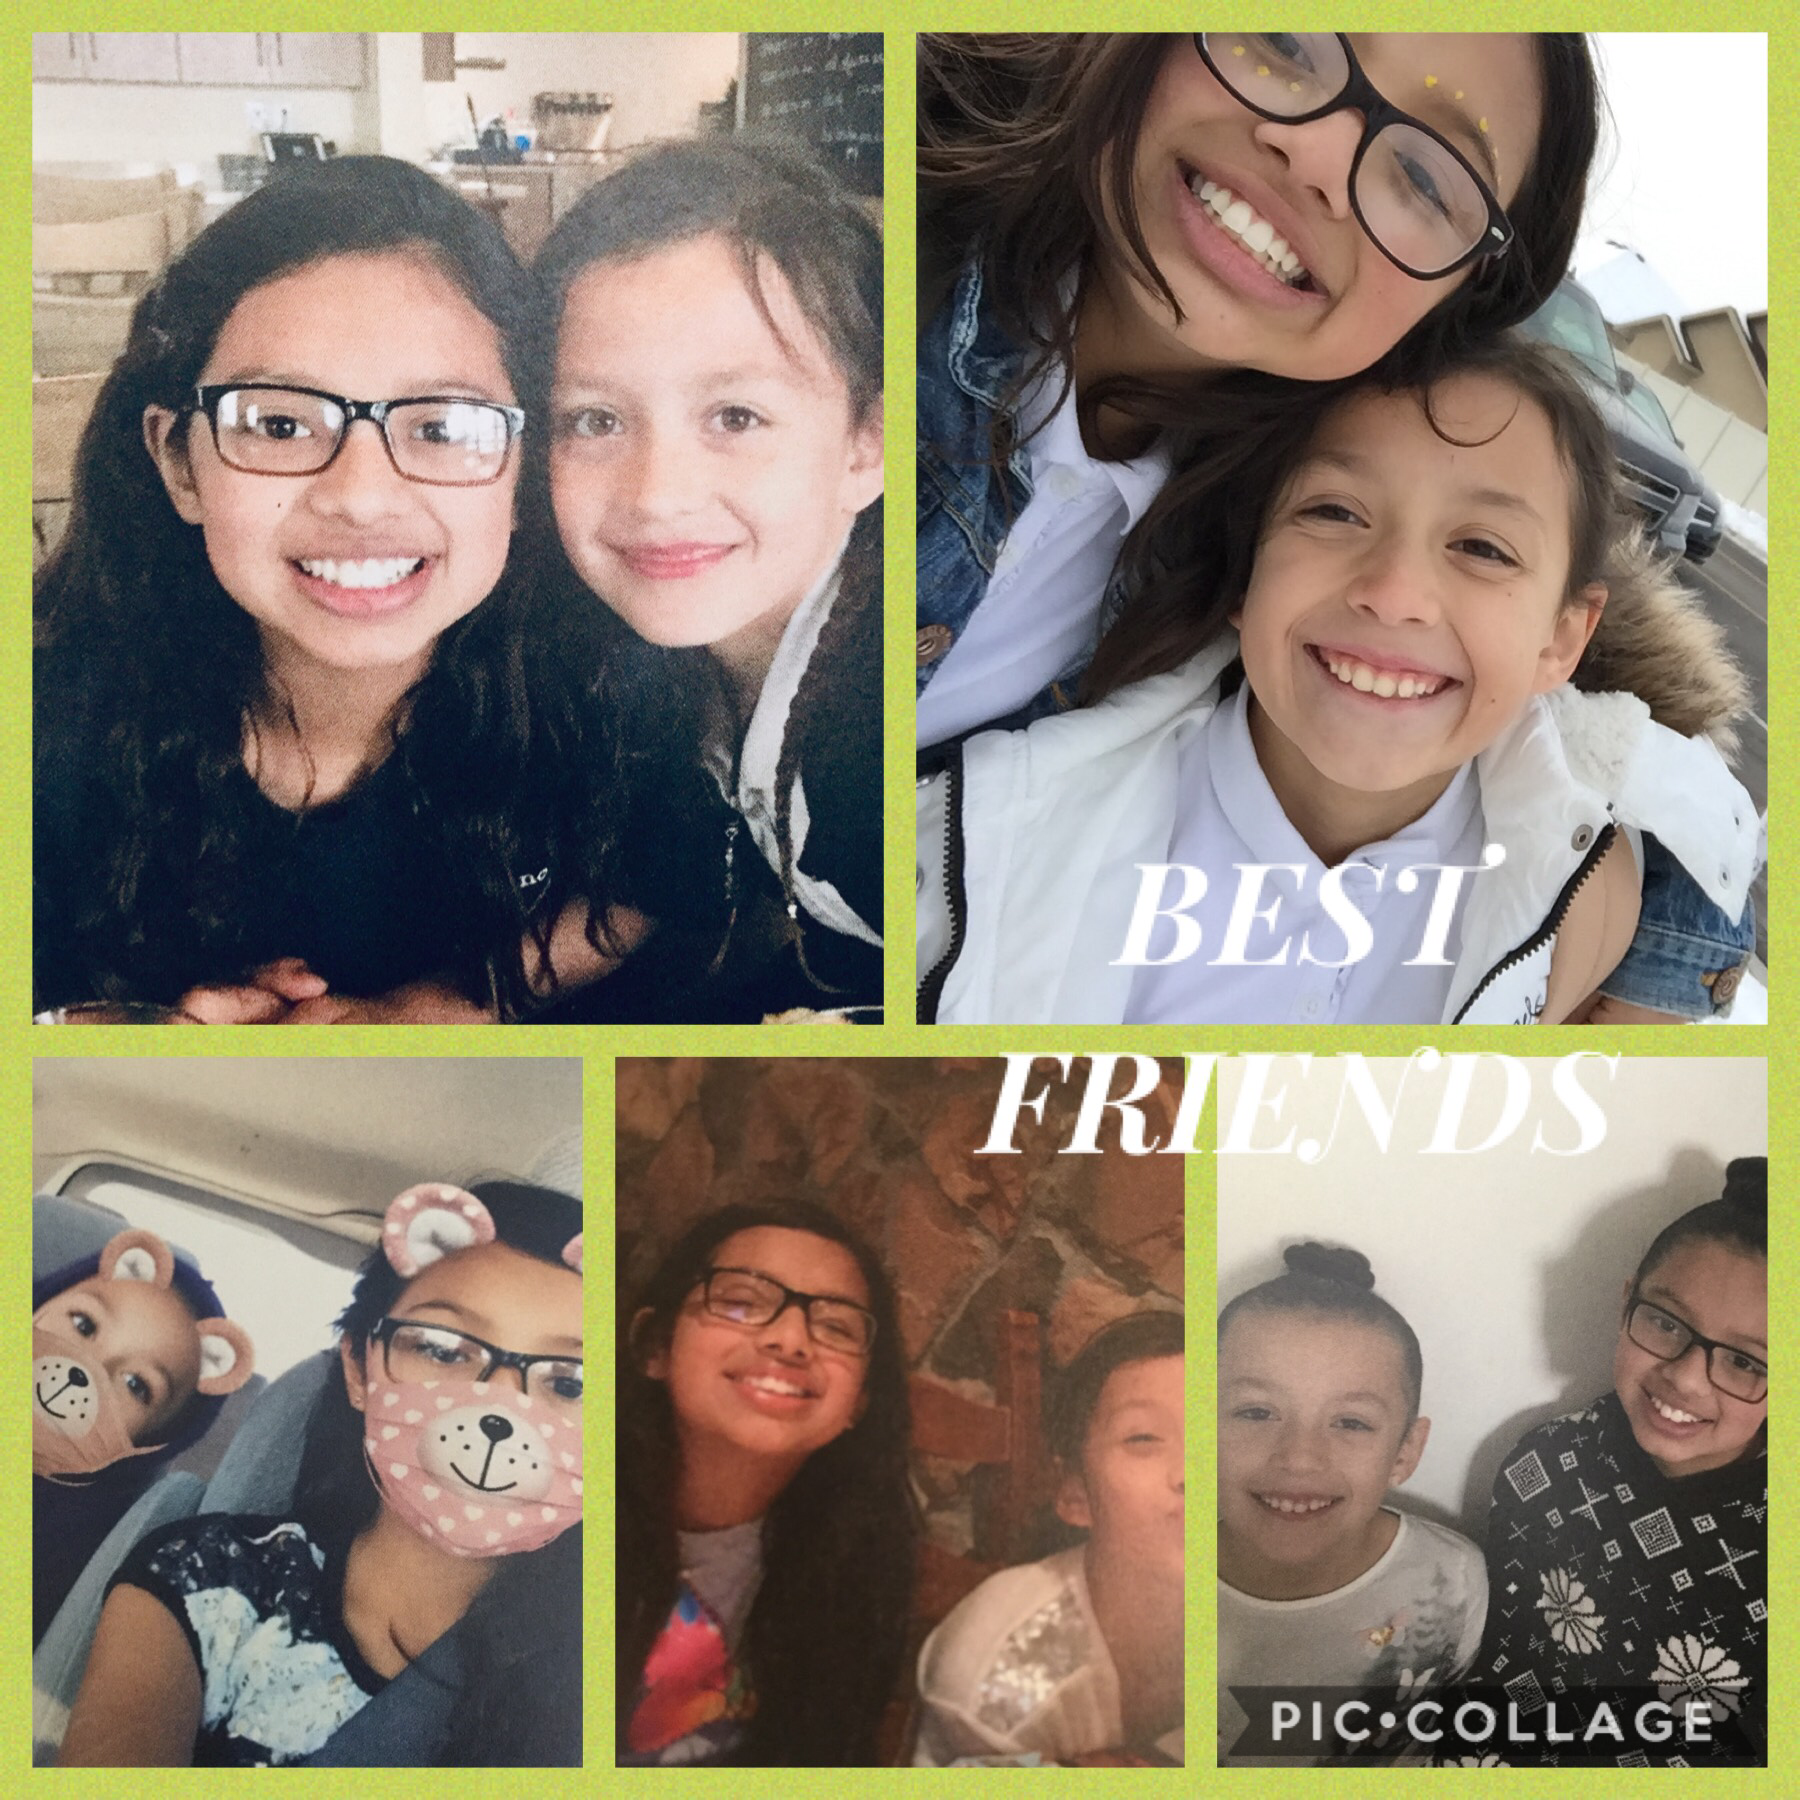 Do you have a best friend? I do. Comment your best friend’s/friends name!